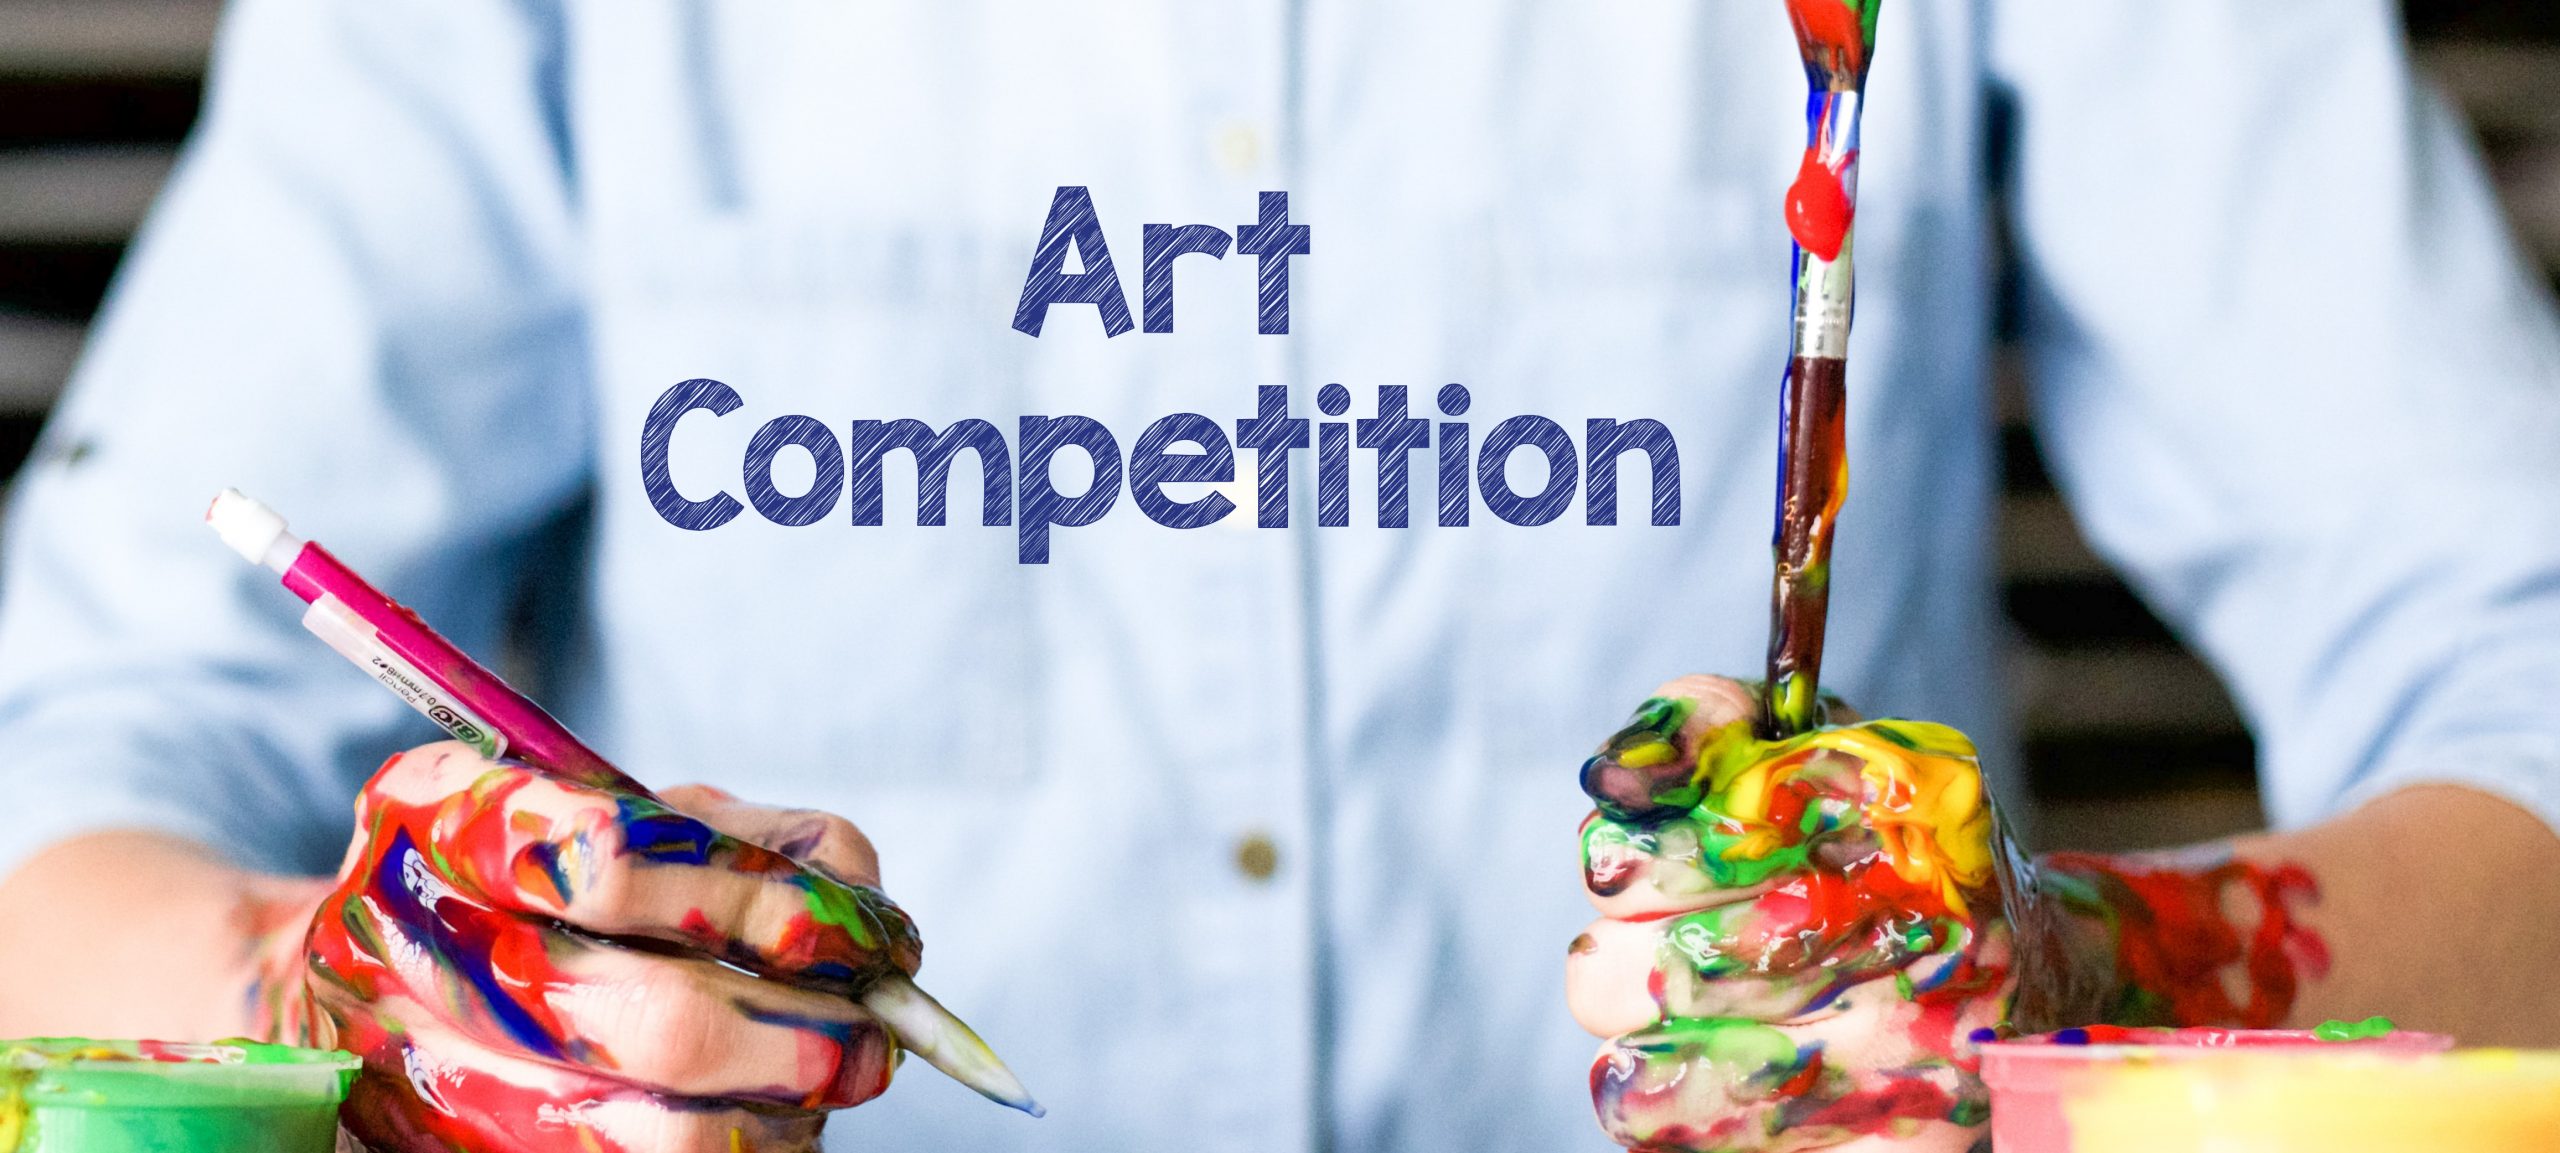 National Art Competition! - Real Life Options